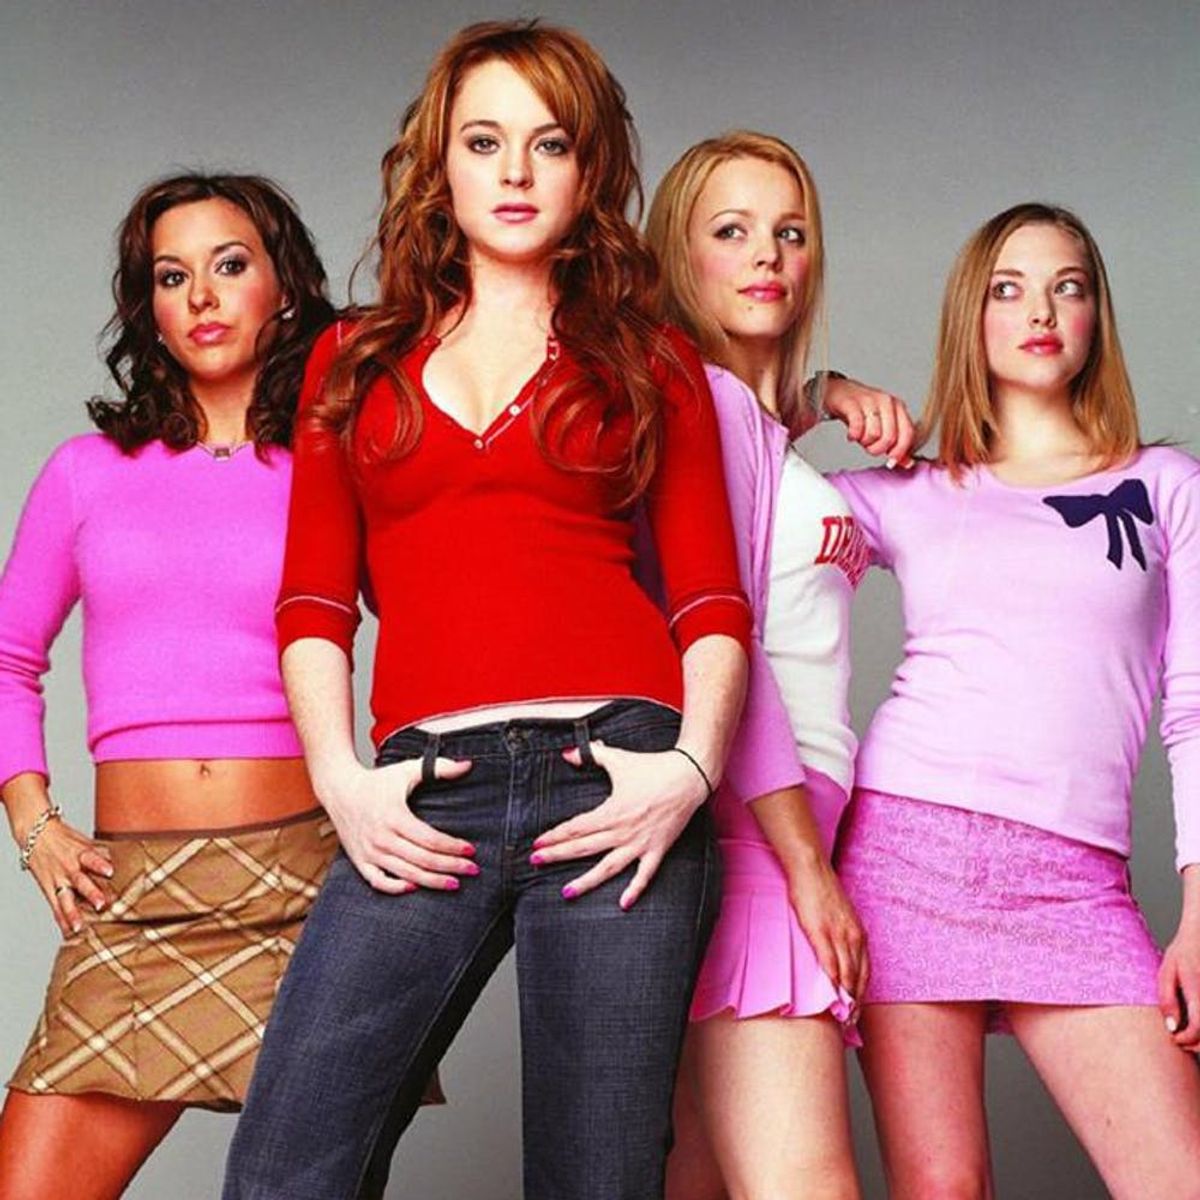 Here’s Your First Look at the “Mean Girls” Musical Cast